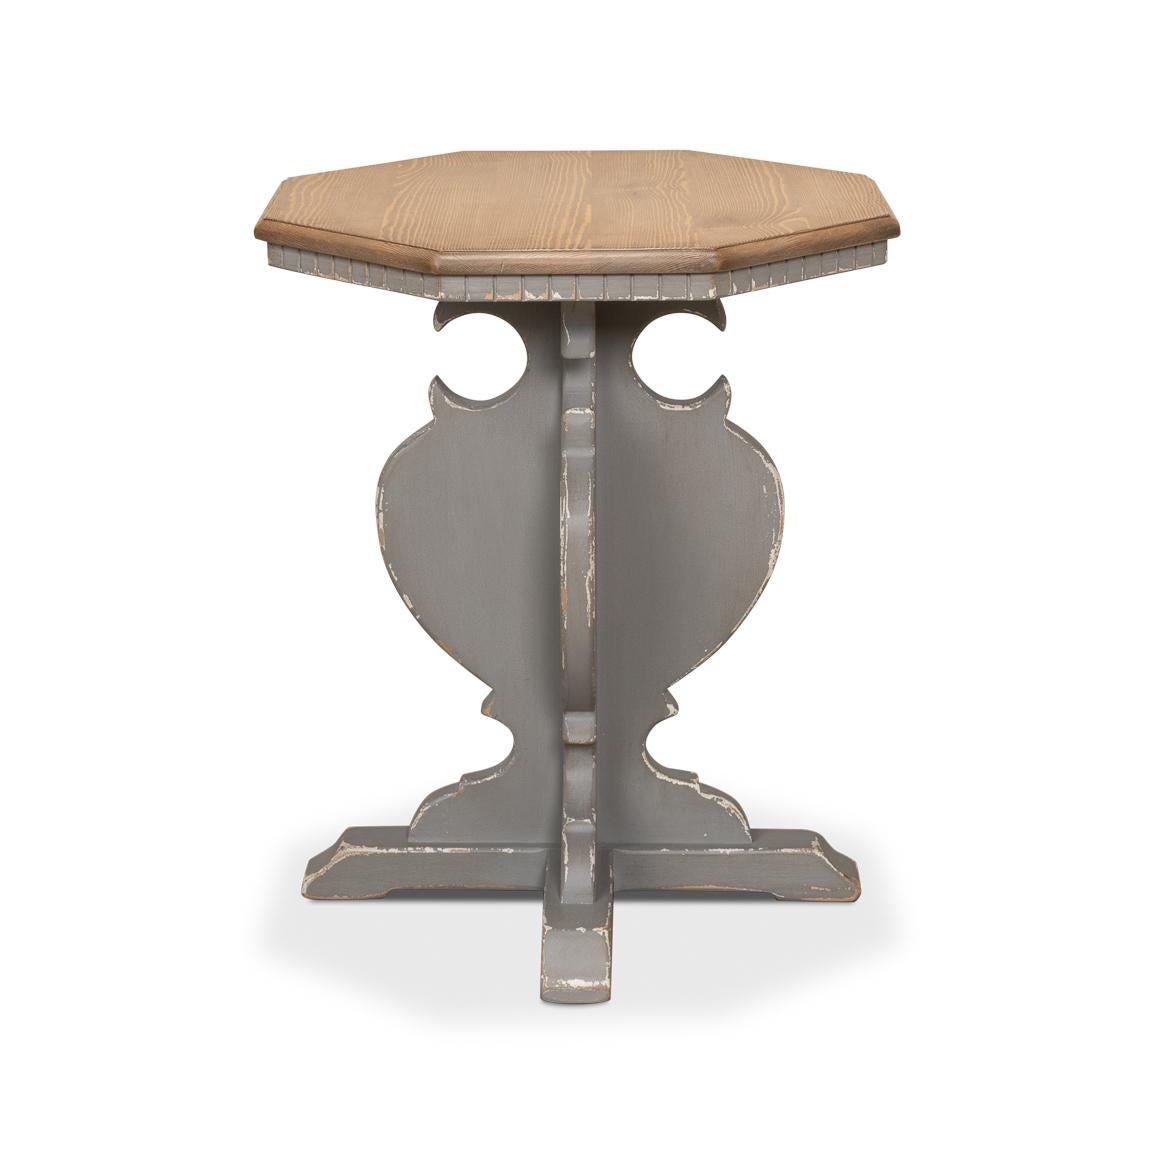 This piece is a conversation starter, marrying the sturdiness of its wooden top with the whimsical elegance of its distressed grey base.

The table's top octagonal surface boasts a natural finish that highlights its rich grain. The base is a work of